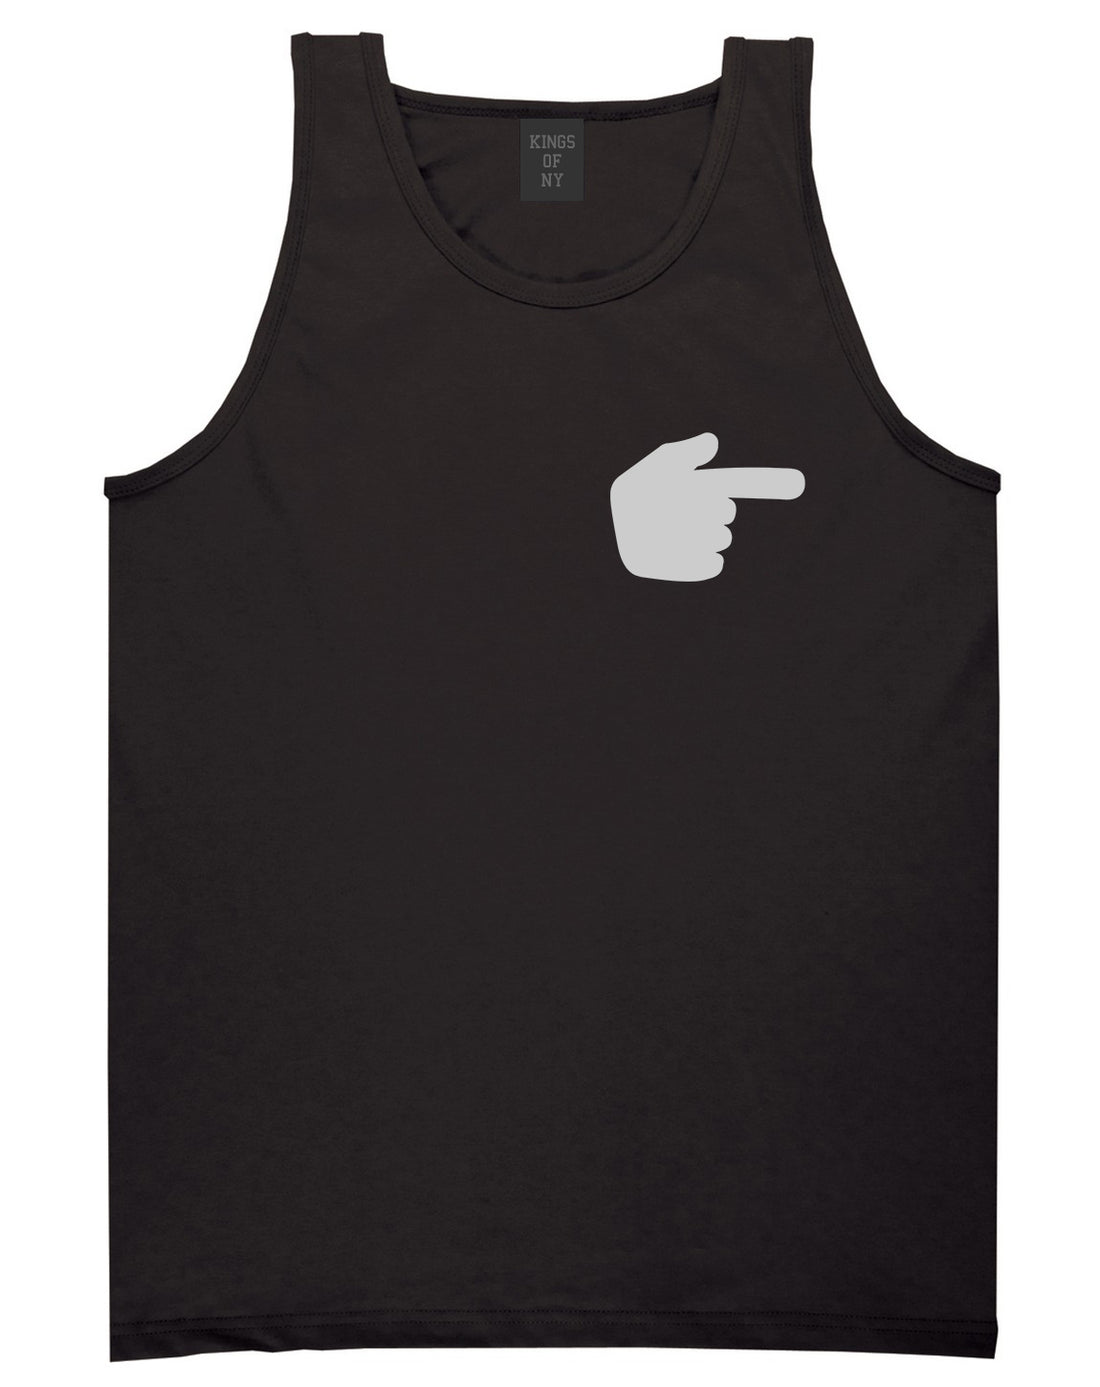 Datway_Pointing_Finger_Emoji_Chest Mens Black Tank Top Shirt by Kings Of NY